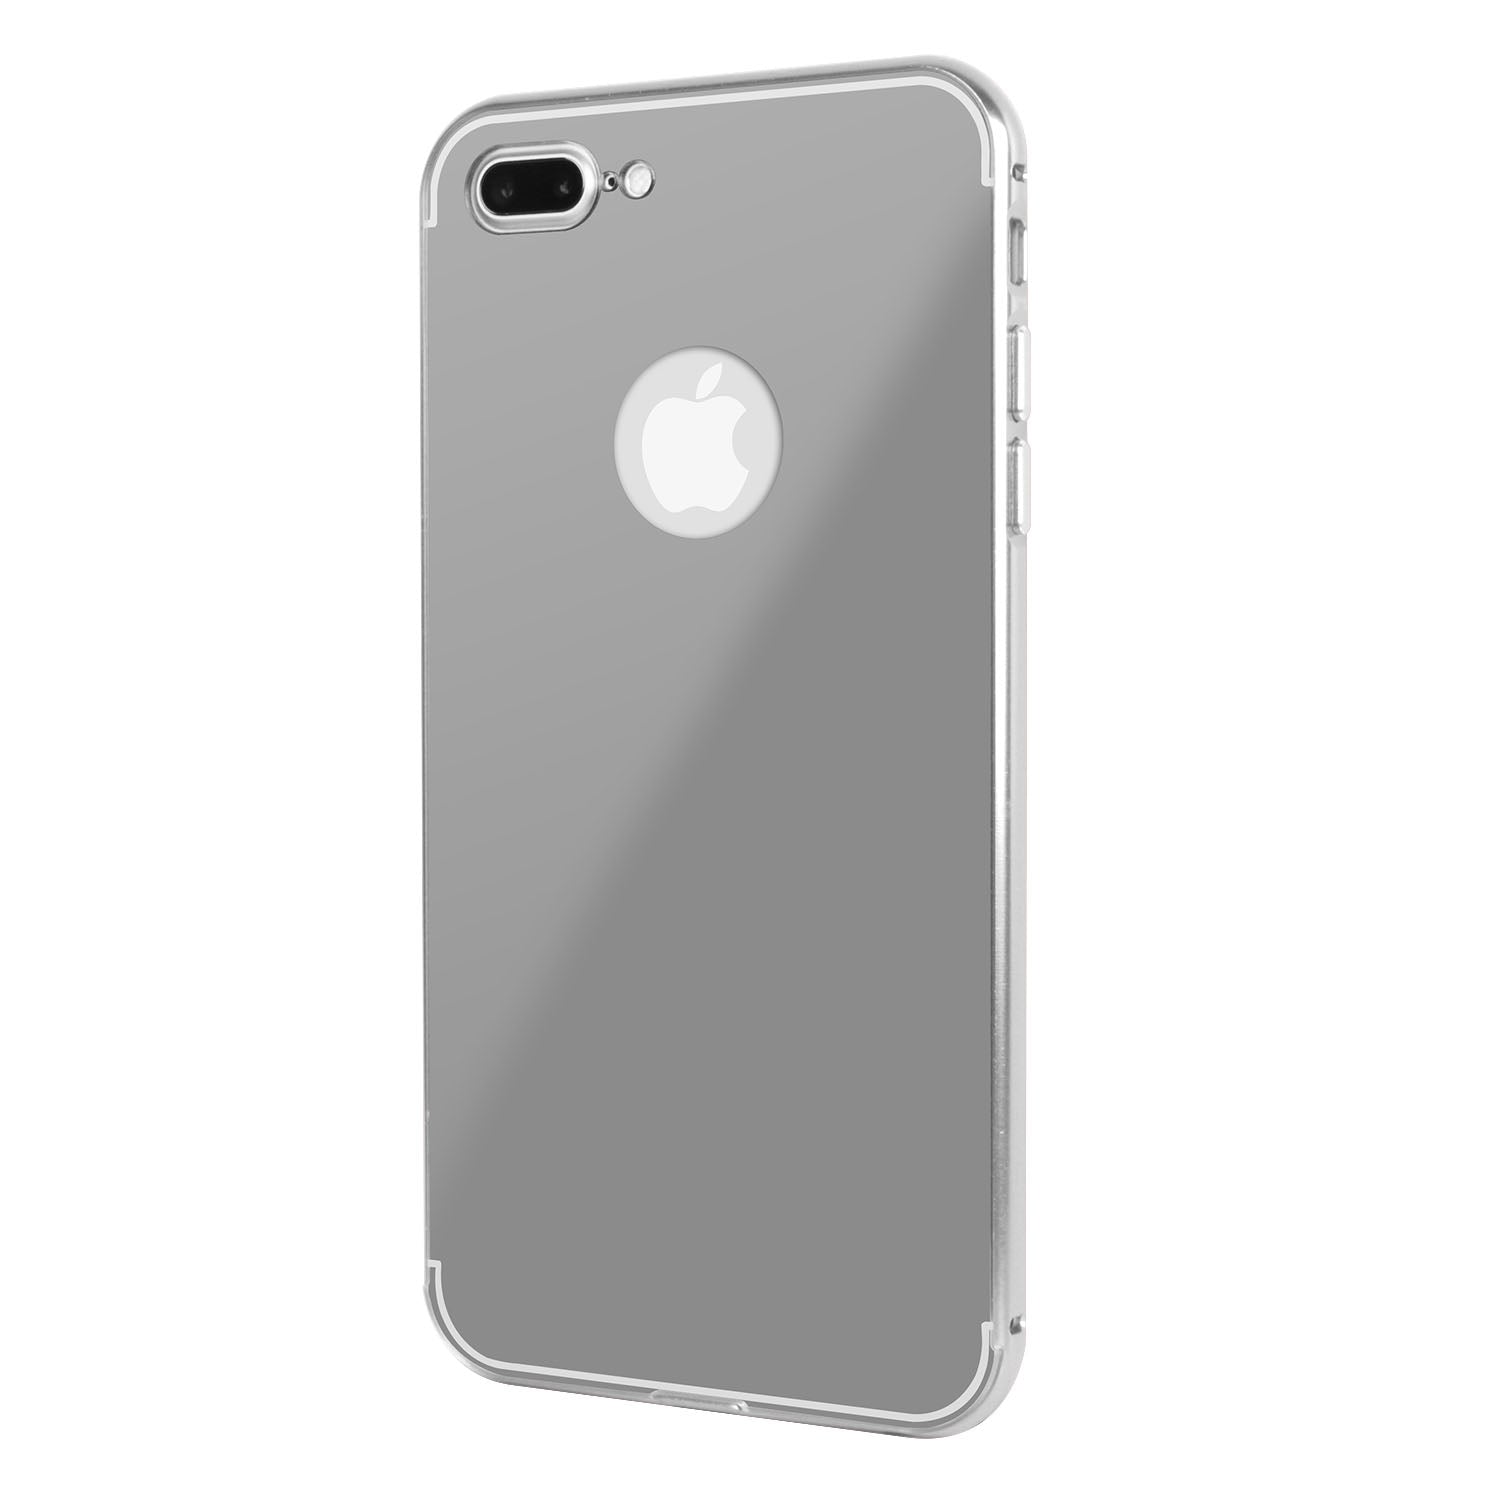 title:Slim Shock-resistant Mirror Case For iPhone 7;color:Silver